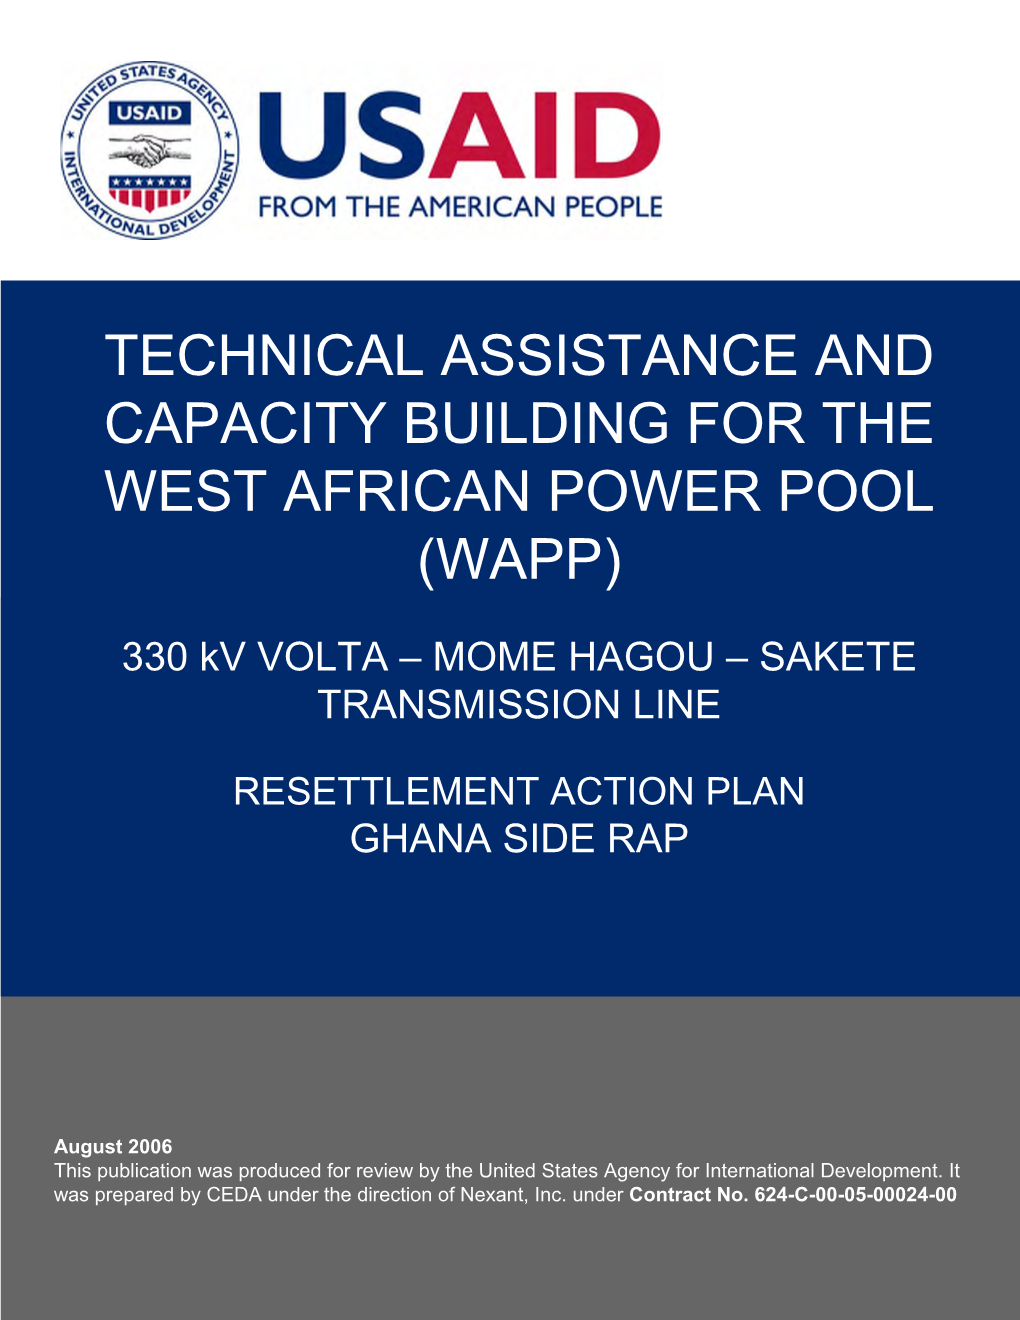 Technical Assistance and Capacity Building for the West African Power Pool (Wapp)